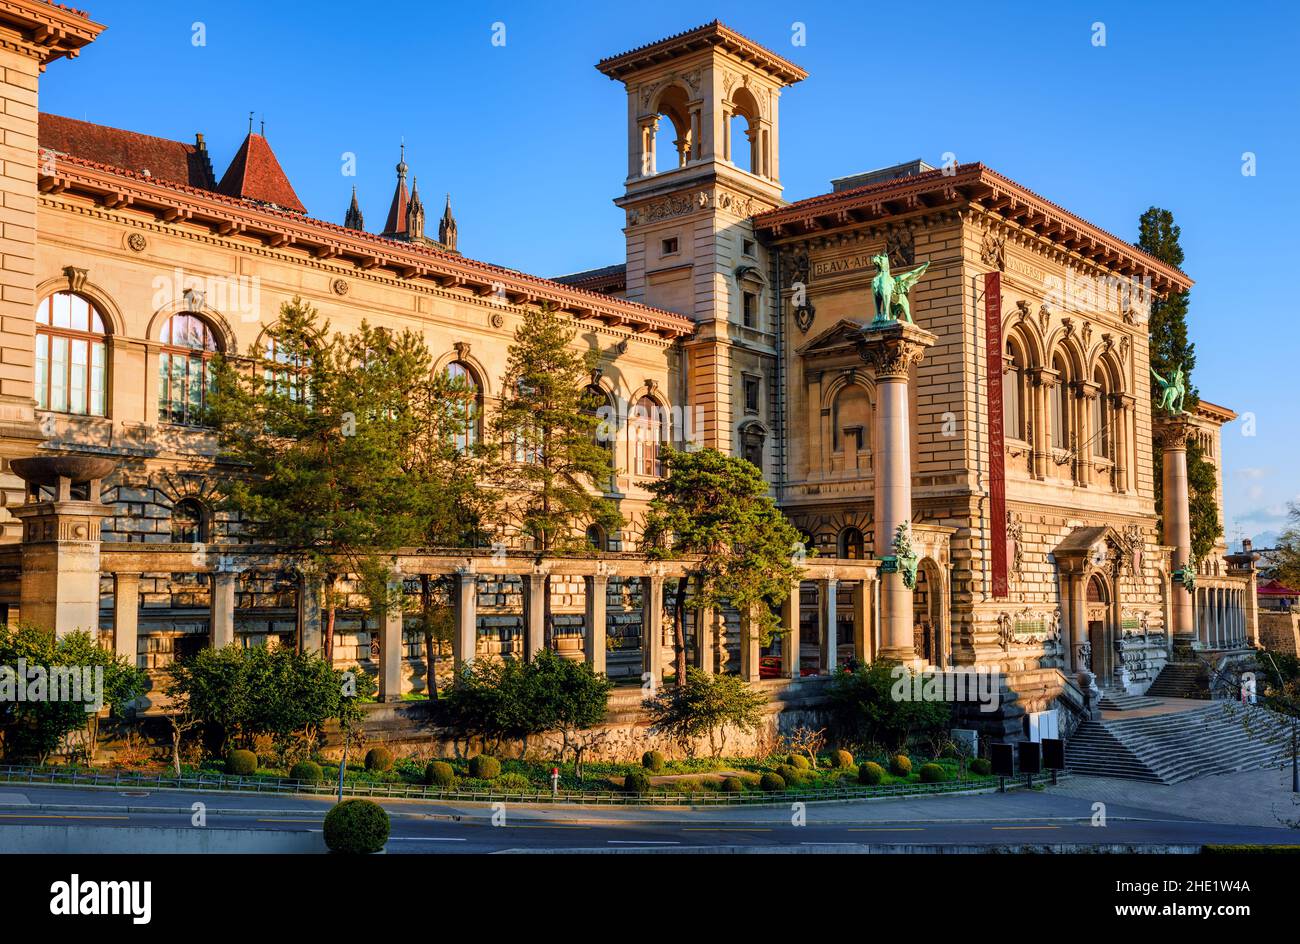 Palais de Rumine, a historical building in Lausanne city center, Switzerland, housing the Lausanne University and different museums Stock Photo